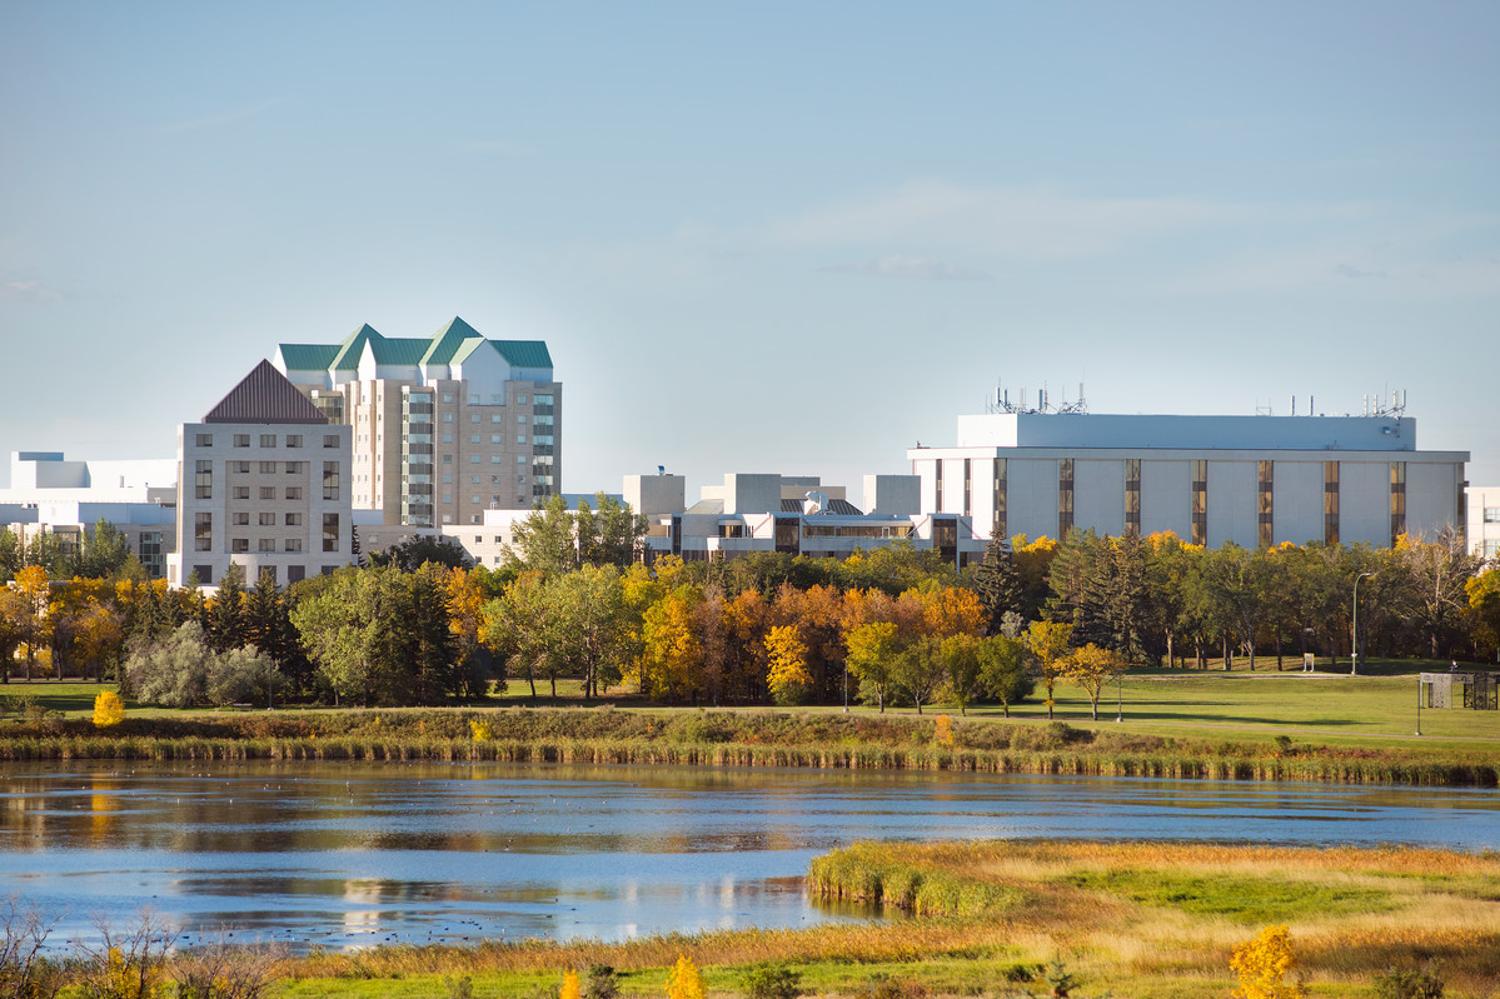 Landscape view of campus across Wascana Lake.